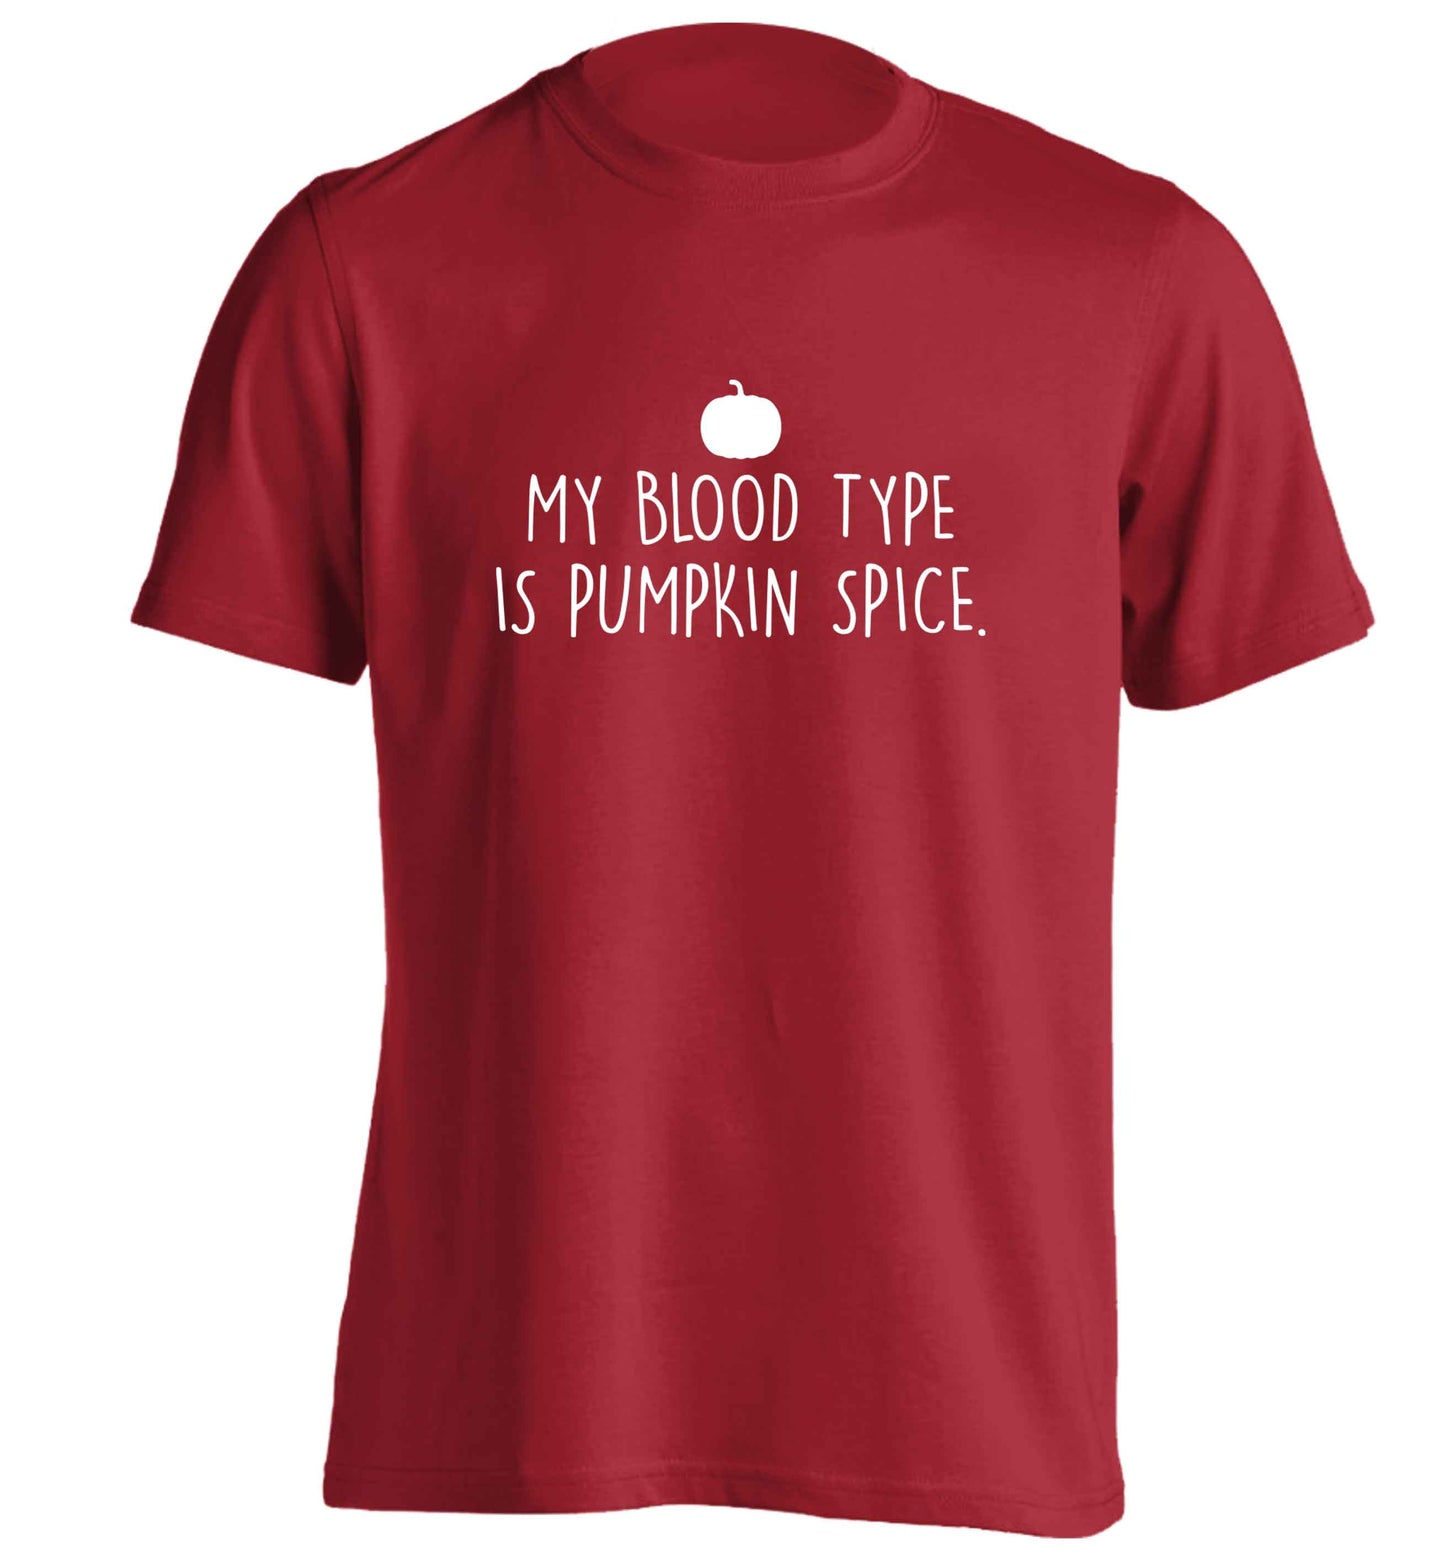 Let Be Pumpkin Spice adults unisex red Tshirt 2XL